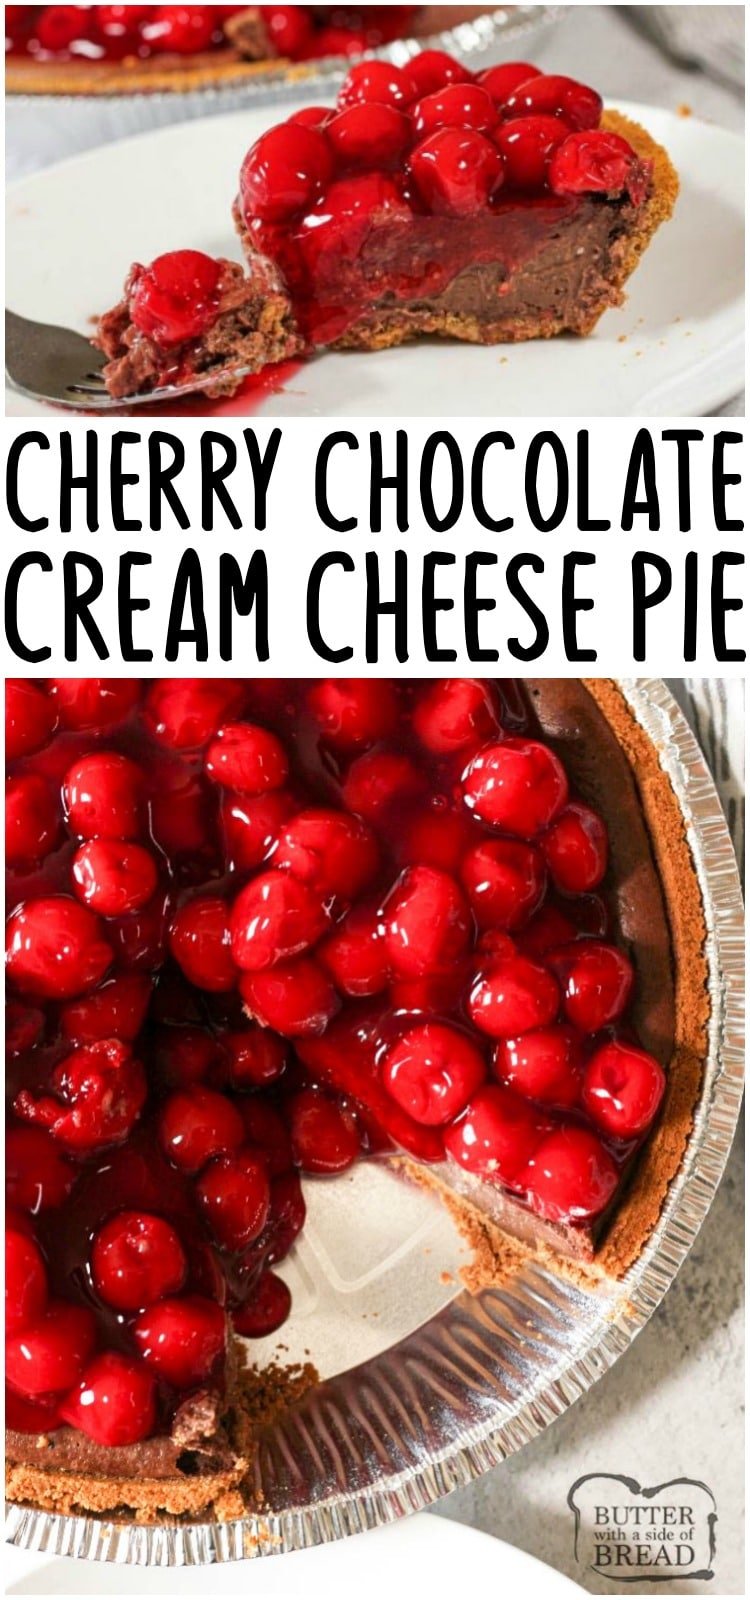 Chocolate Cream Cheese Pie is a simple pie made with cream cheese, cocoa, eggs, cream, vanilla and sugar all baked in a delicious graham cracker crust. This simple cream cheese pie recipe is rich and creamy like a perfect slice of cheesecake.